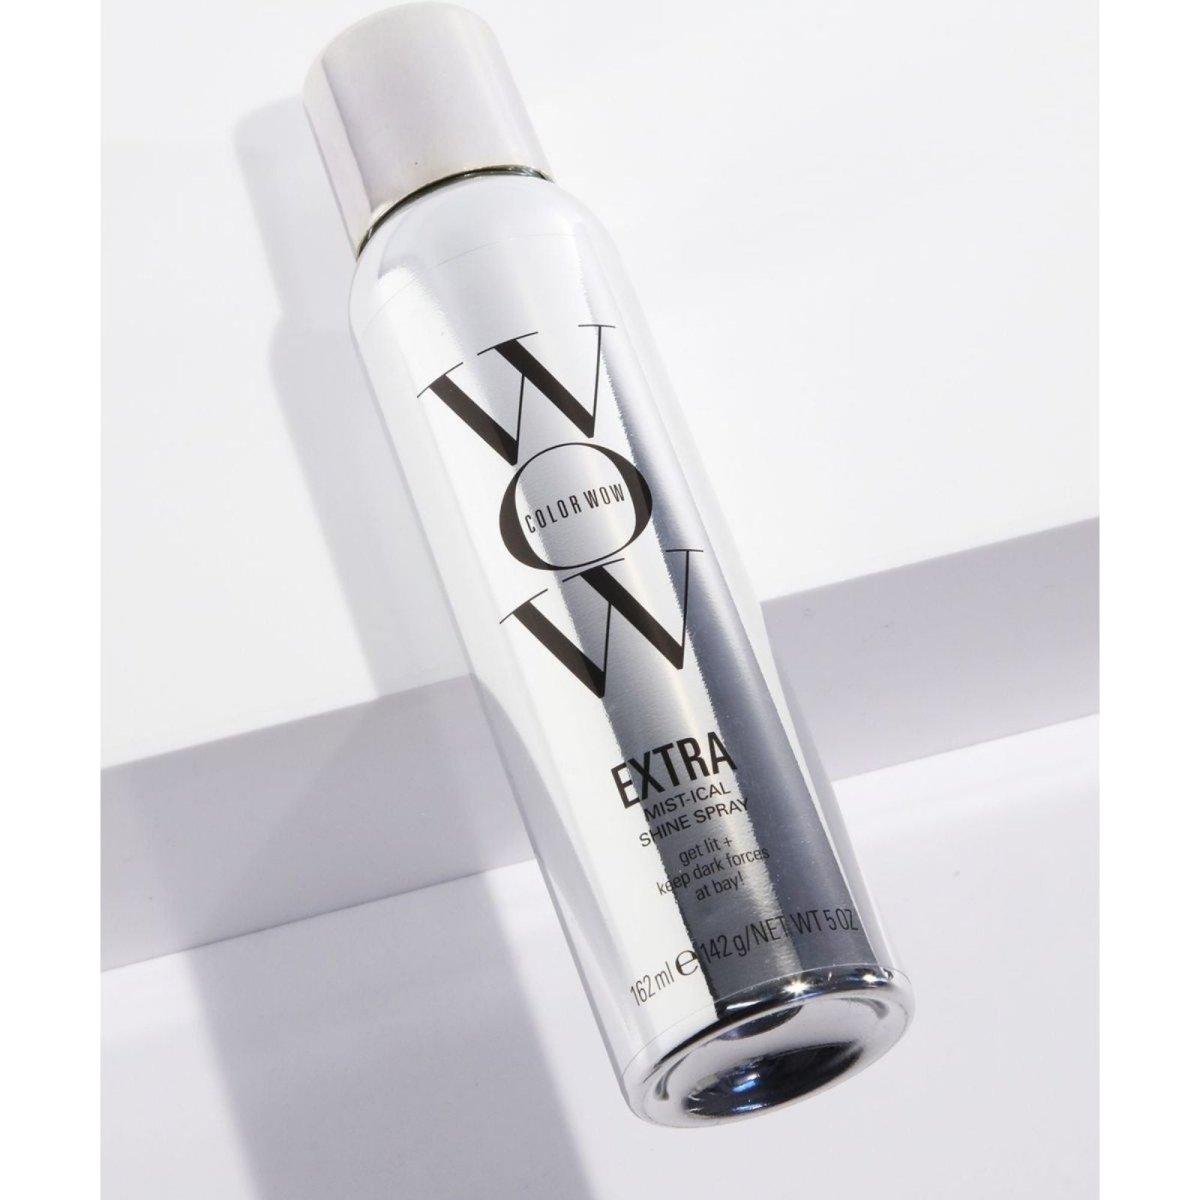 Color Wow | Extra Mist-ical Shine Spray 162ml - DG International Ventures Limited